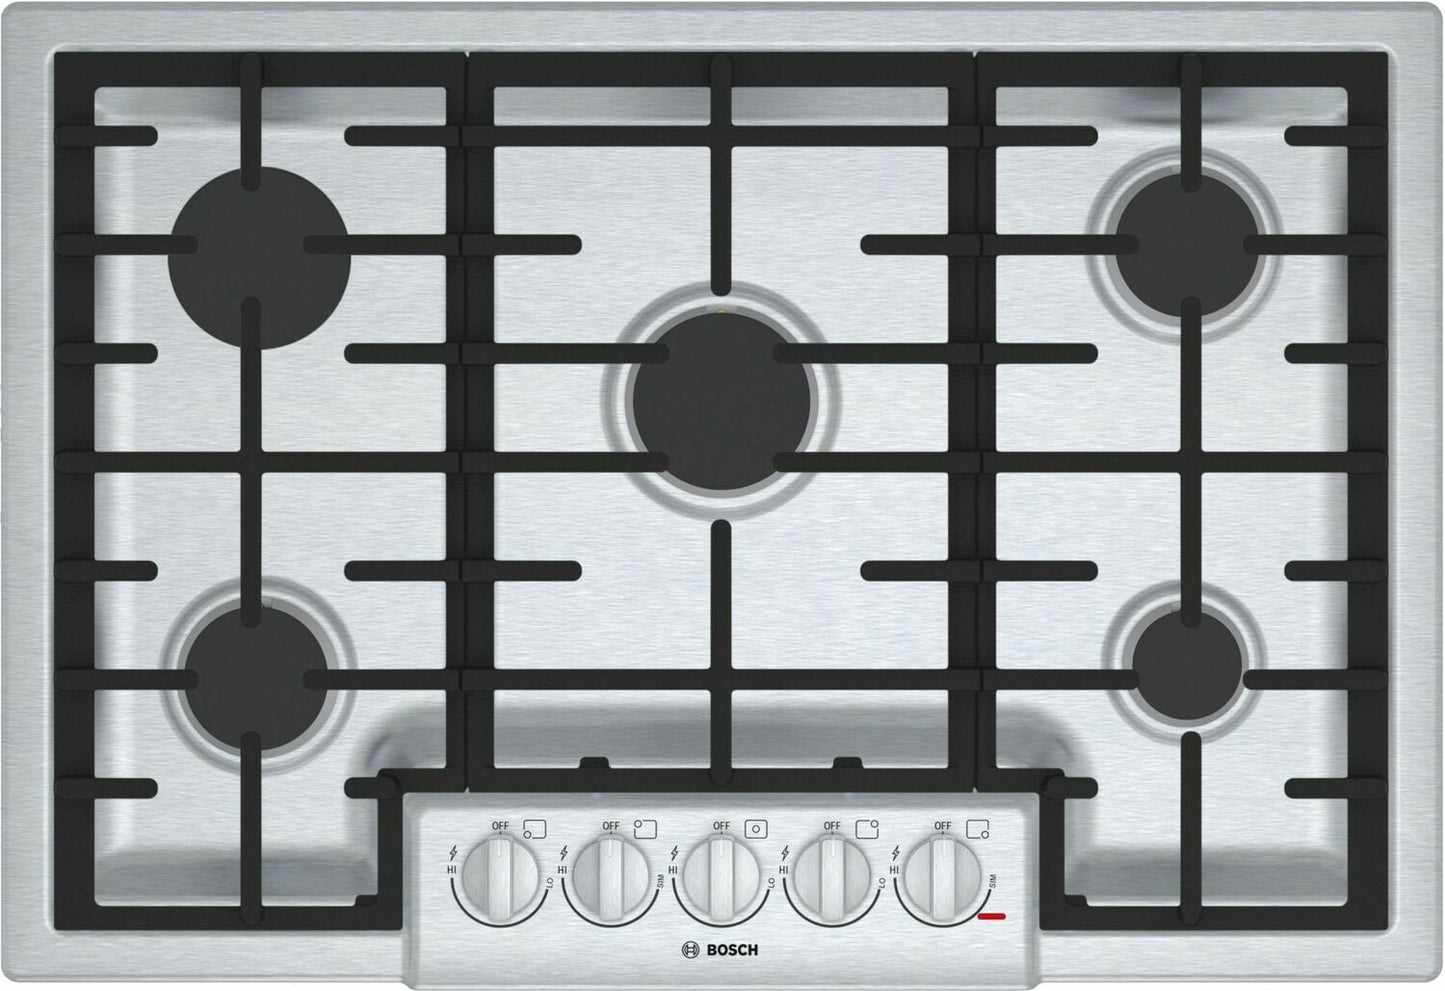 Bosch NGM8056UC 800 Series, 30" Gas Cooktop, 5 Burners, Stainless Steel